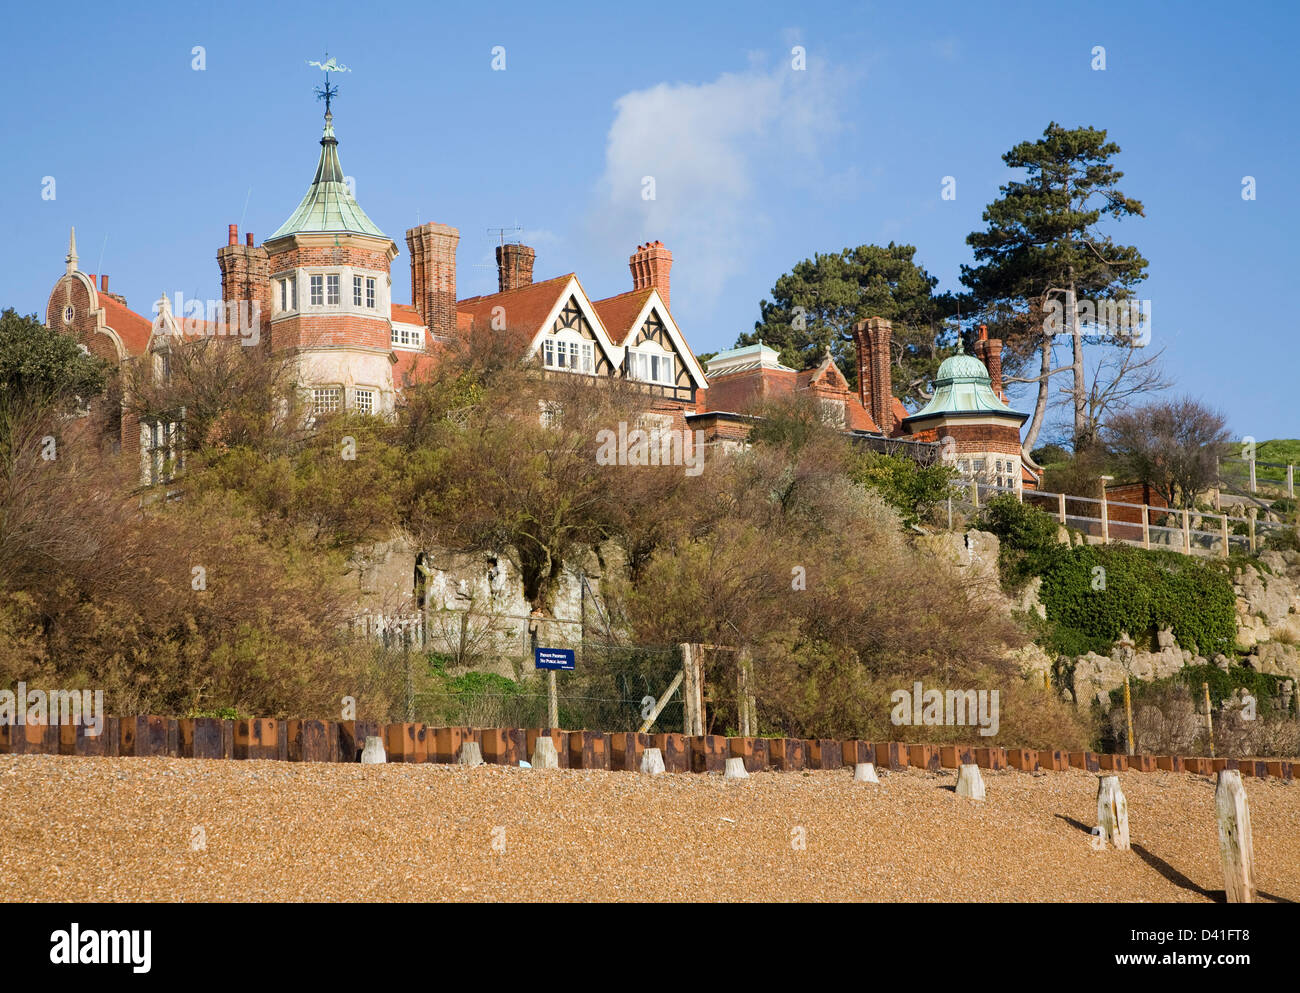 Gothic towers and man made Pulhamite cliifs, Bawdsey Manor, Suffolk, England Stock Photo